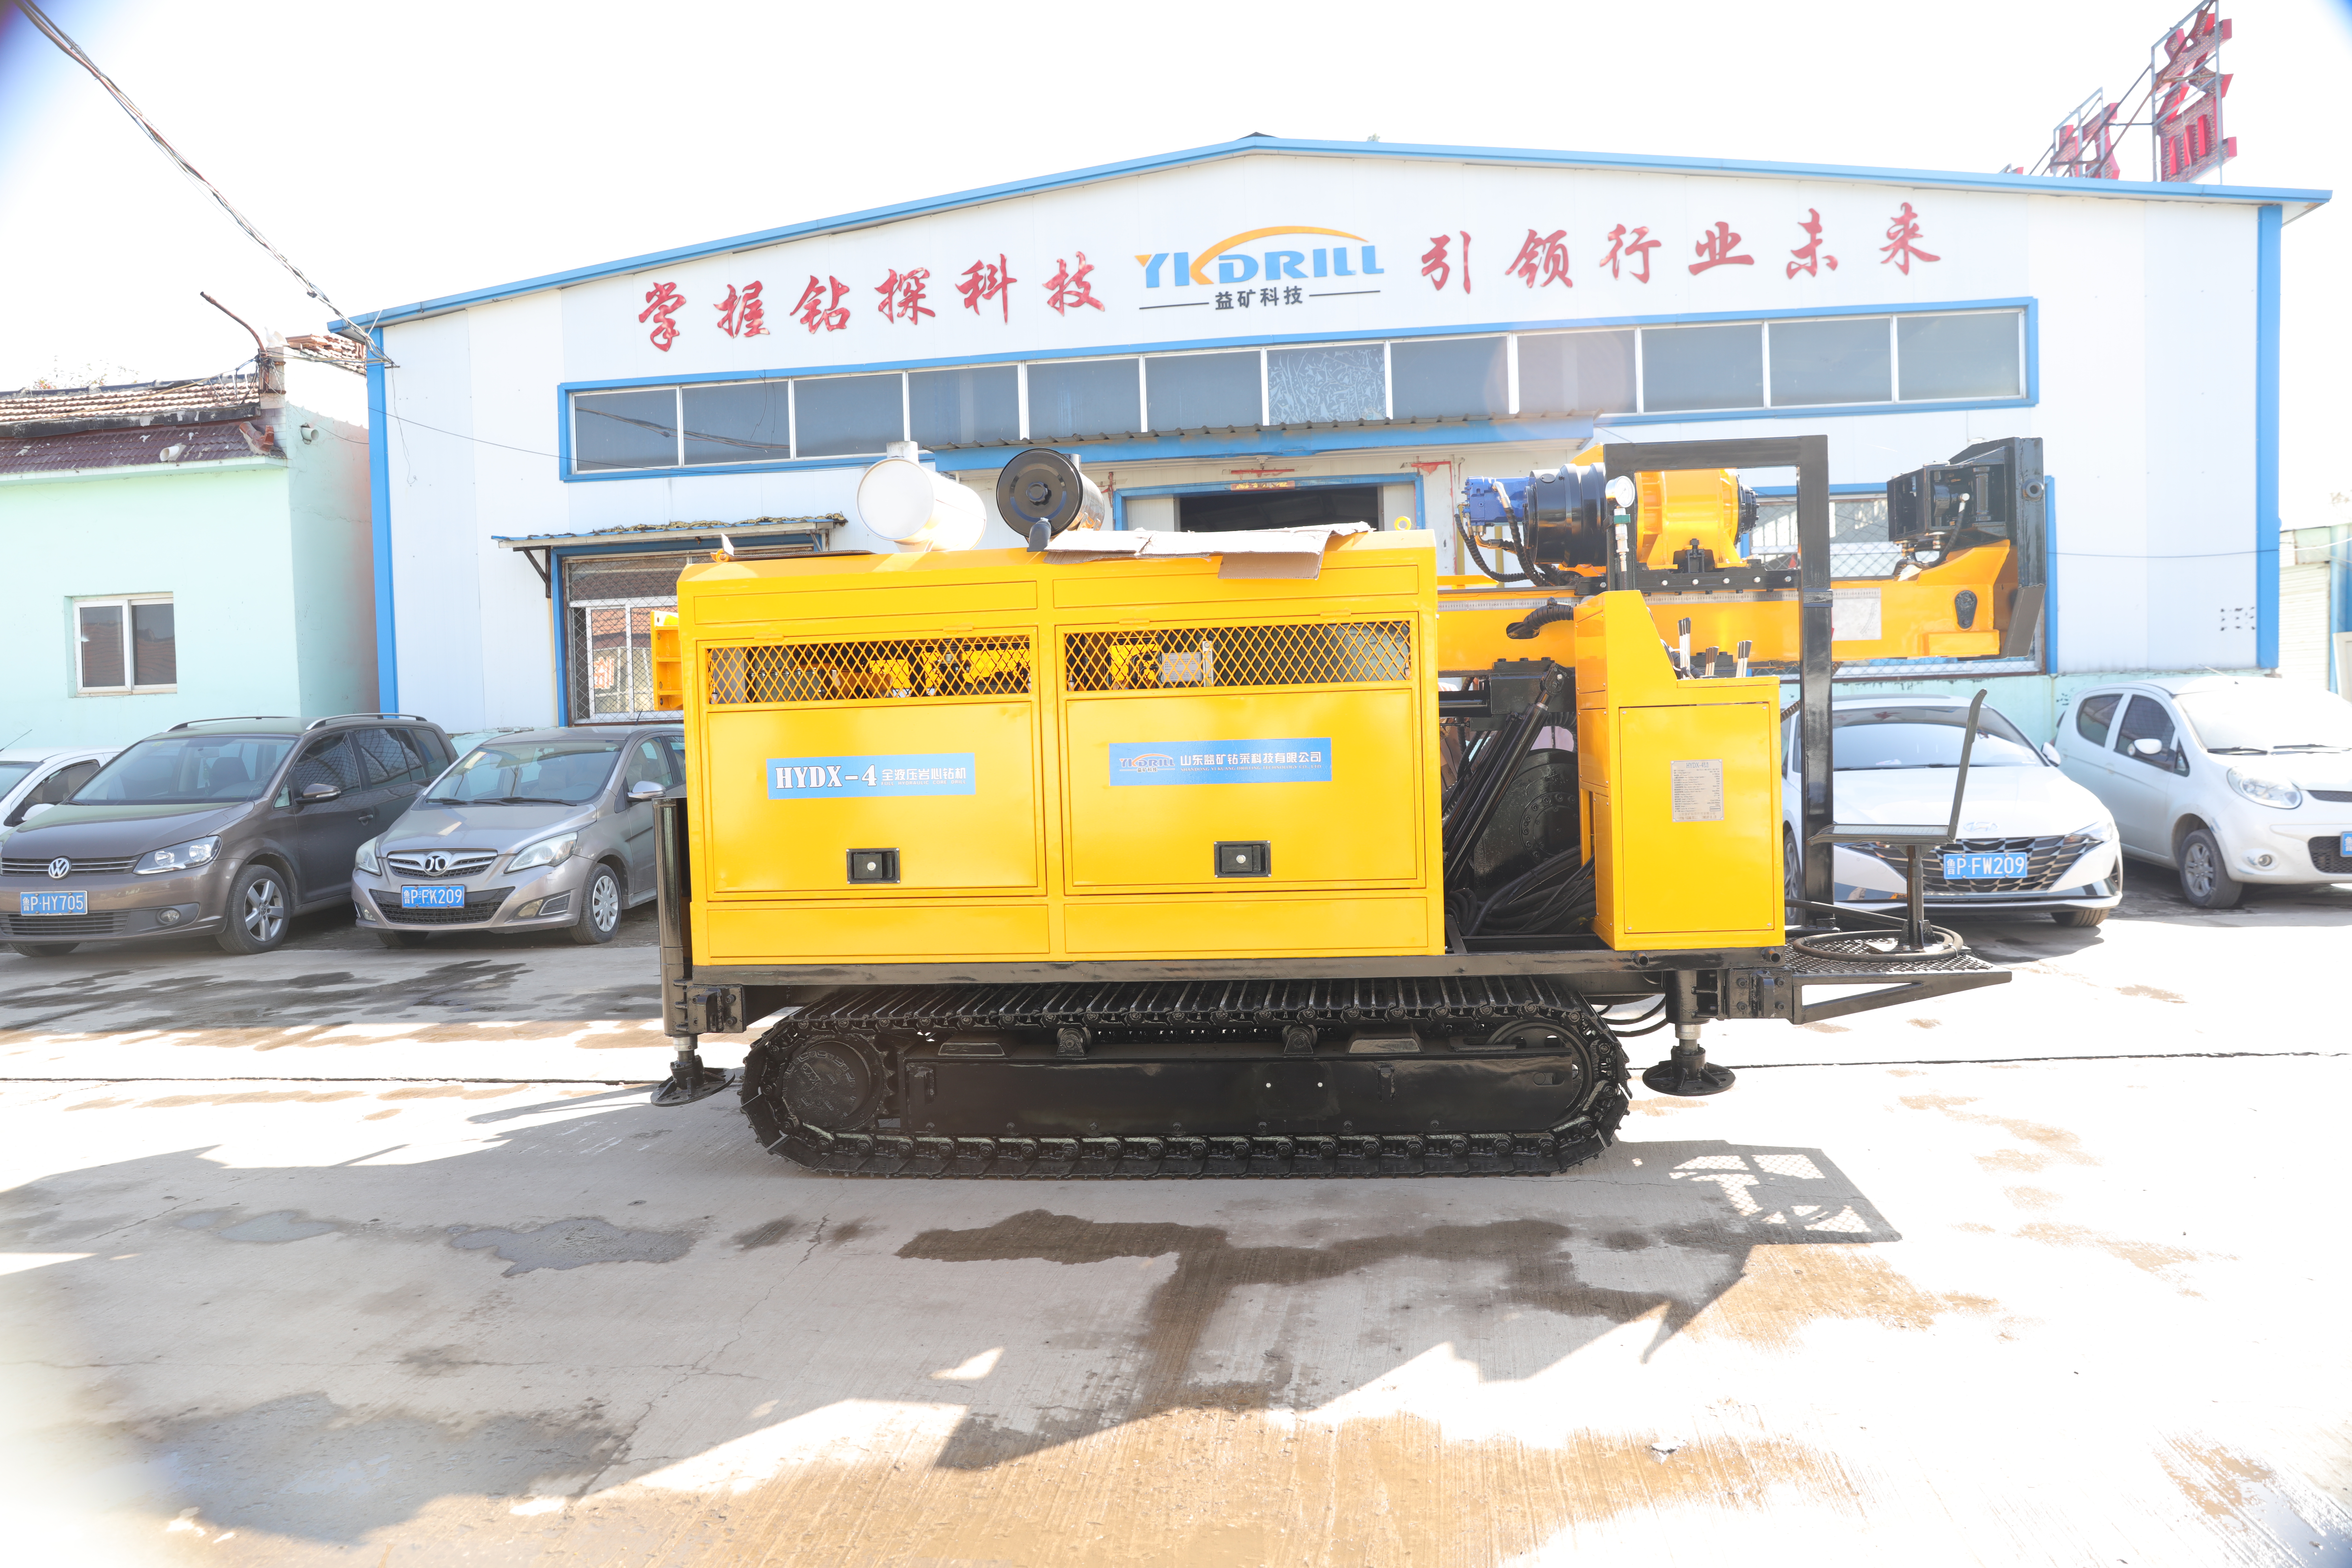 Fy300 Hydraulic Drill Rig Machine for Water Well